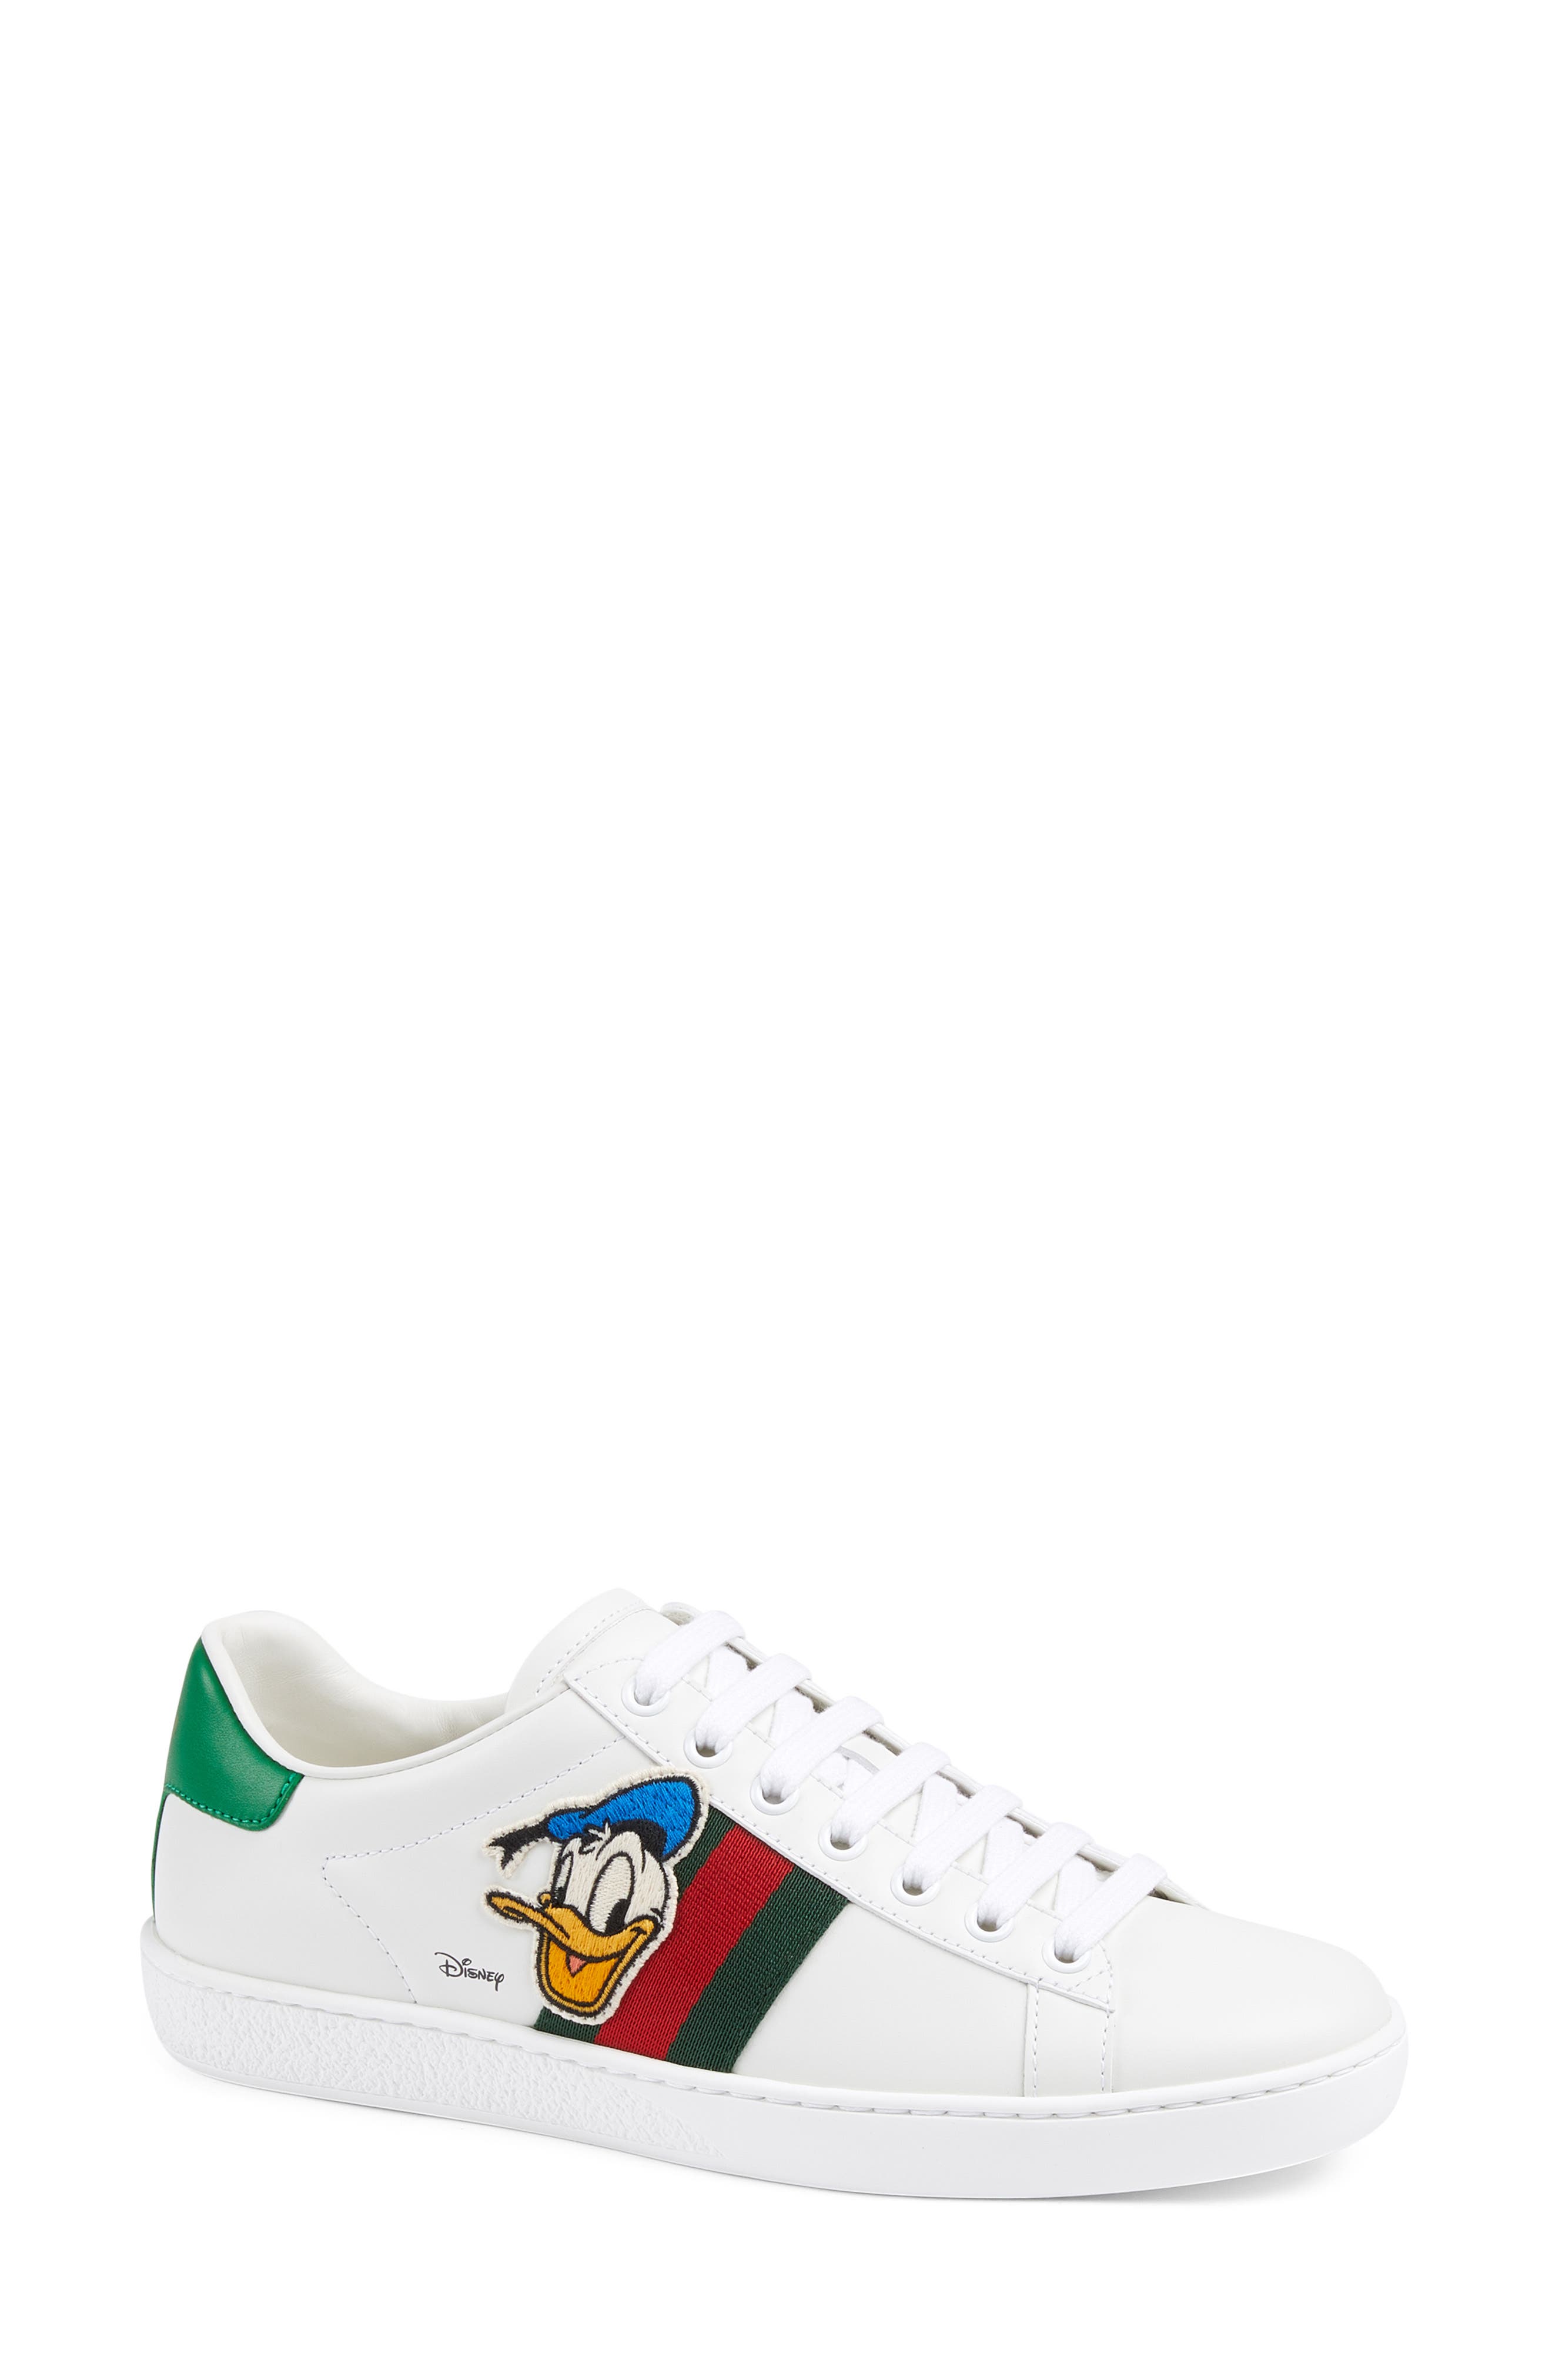 nordstrom gucci ace sneakers